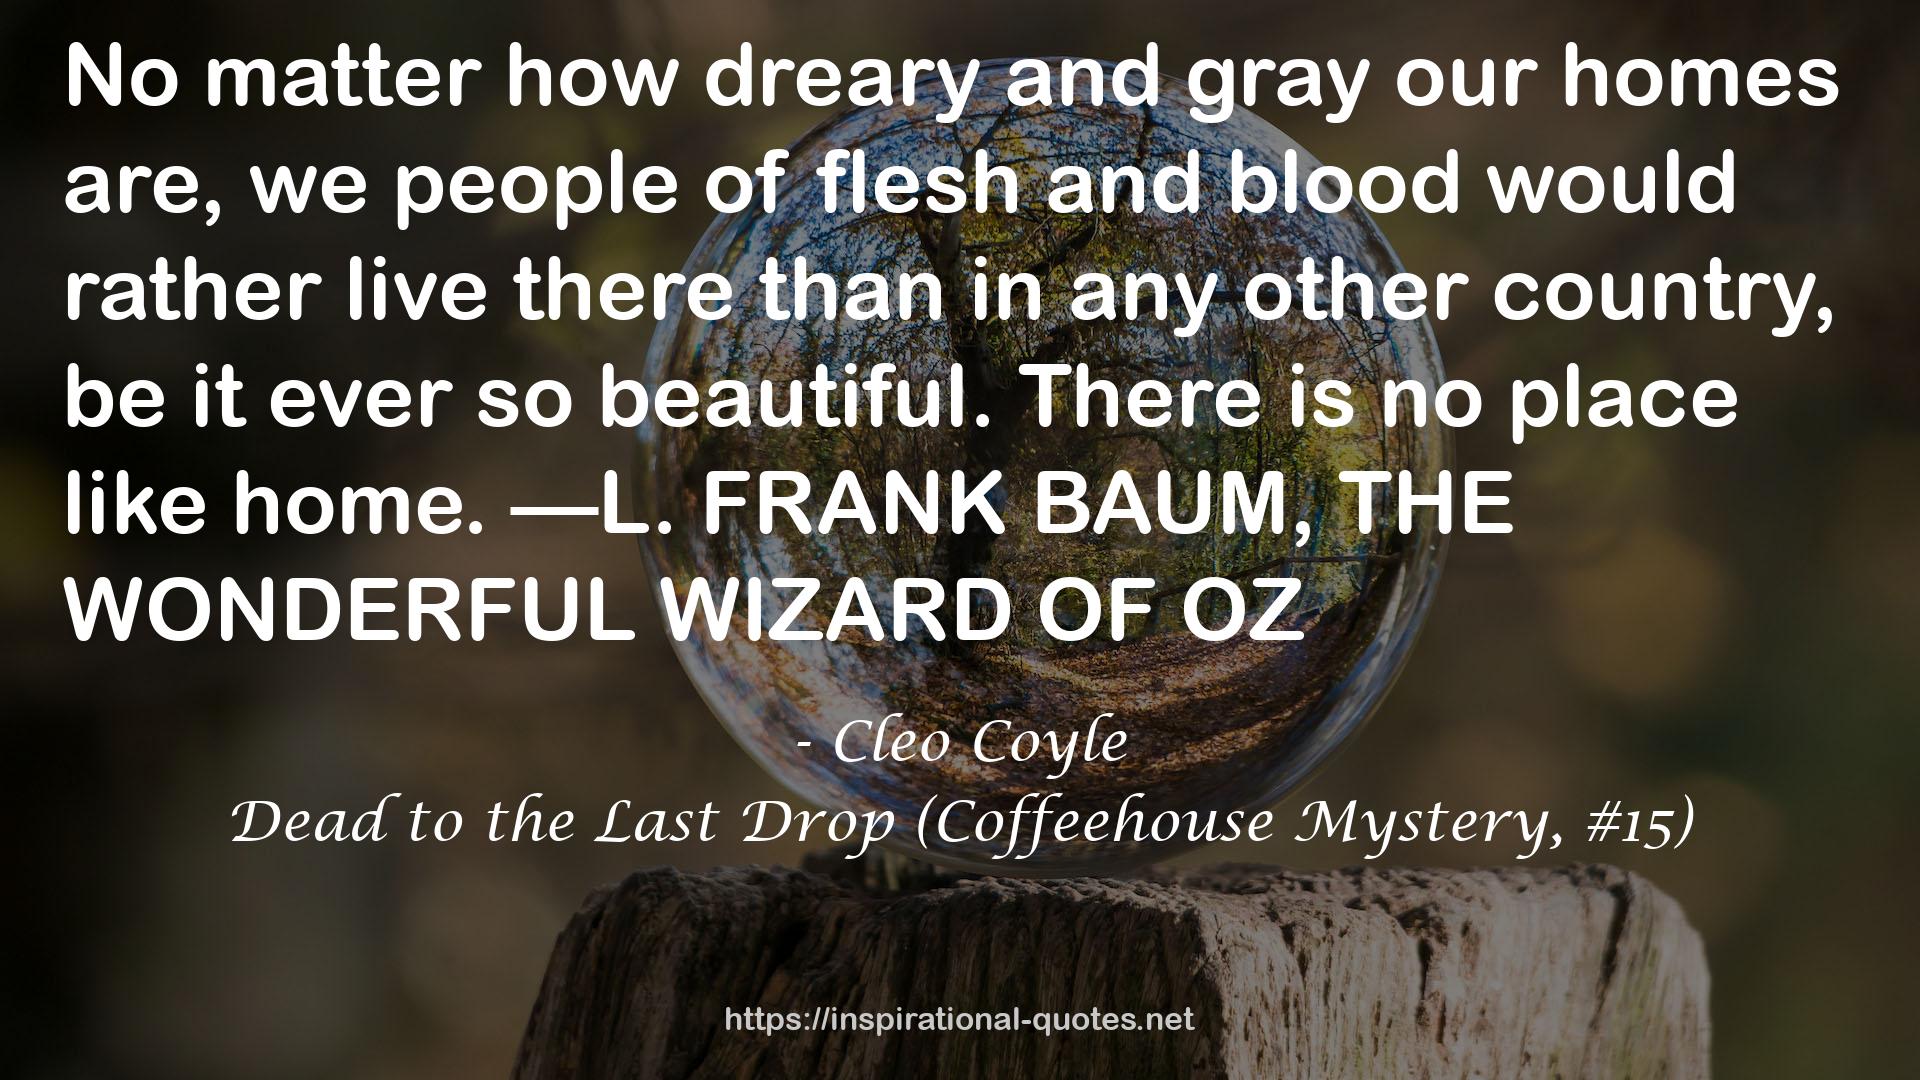 Dead to the Last Drop (Coffeehouse Mystery, #15) QUOTES